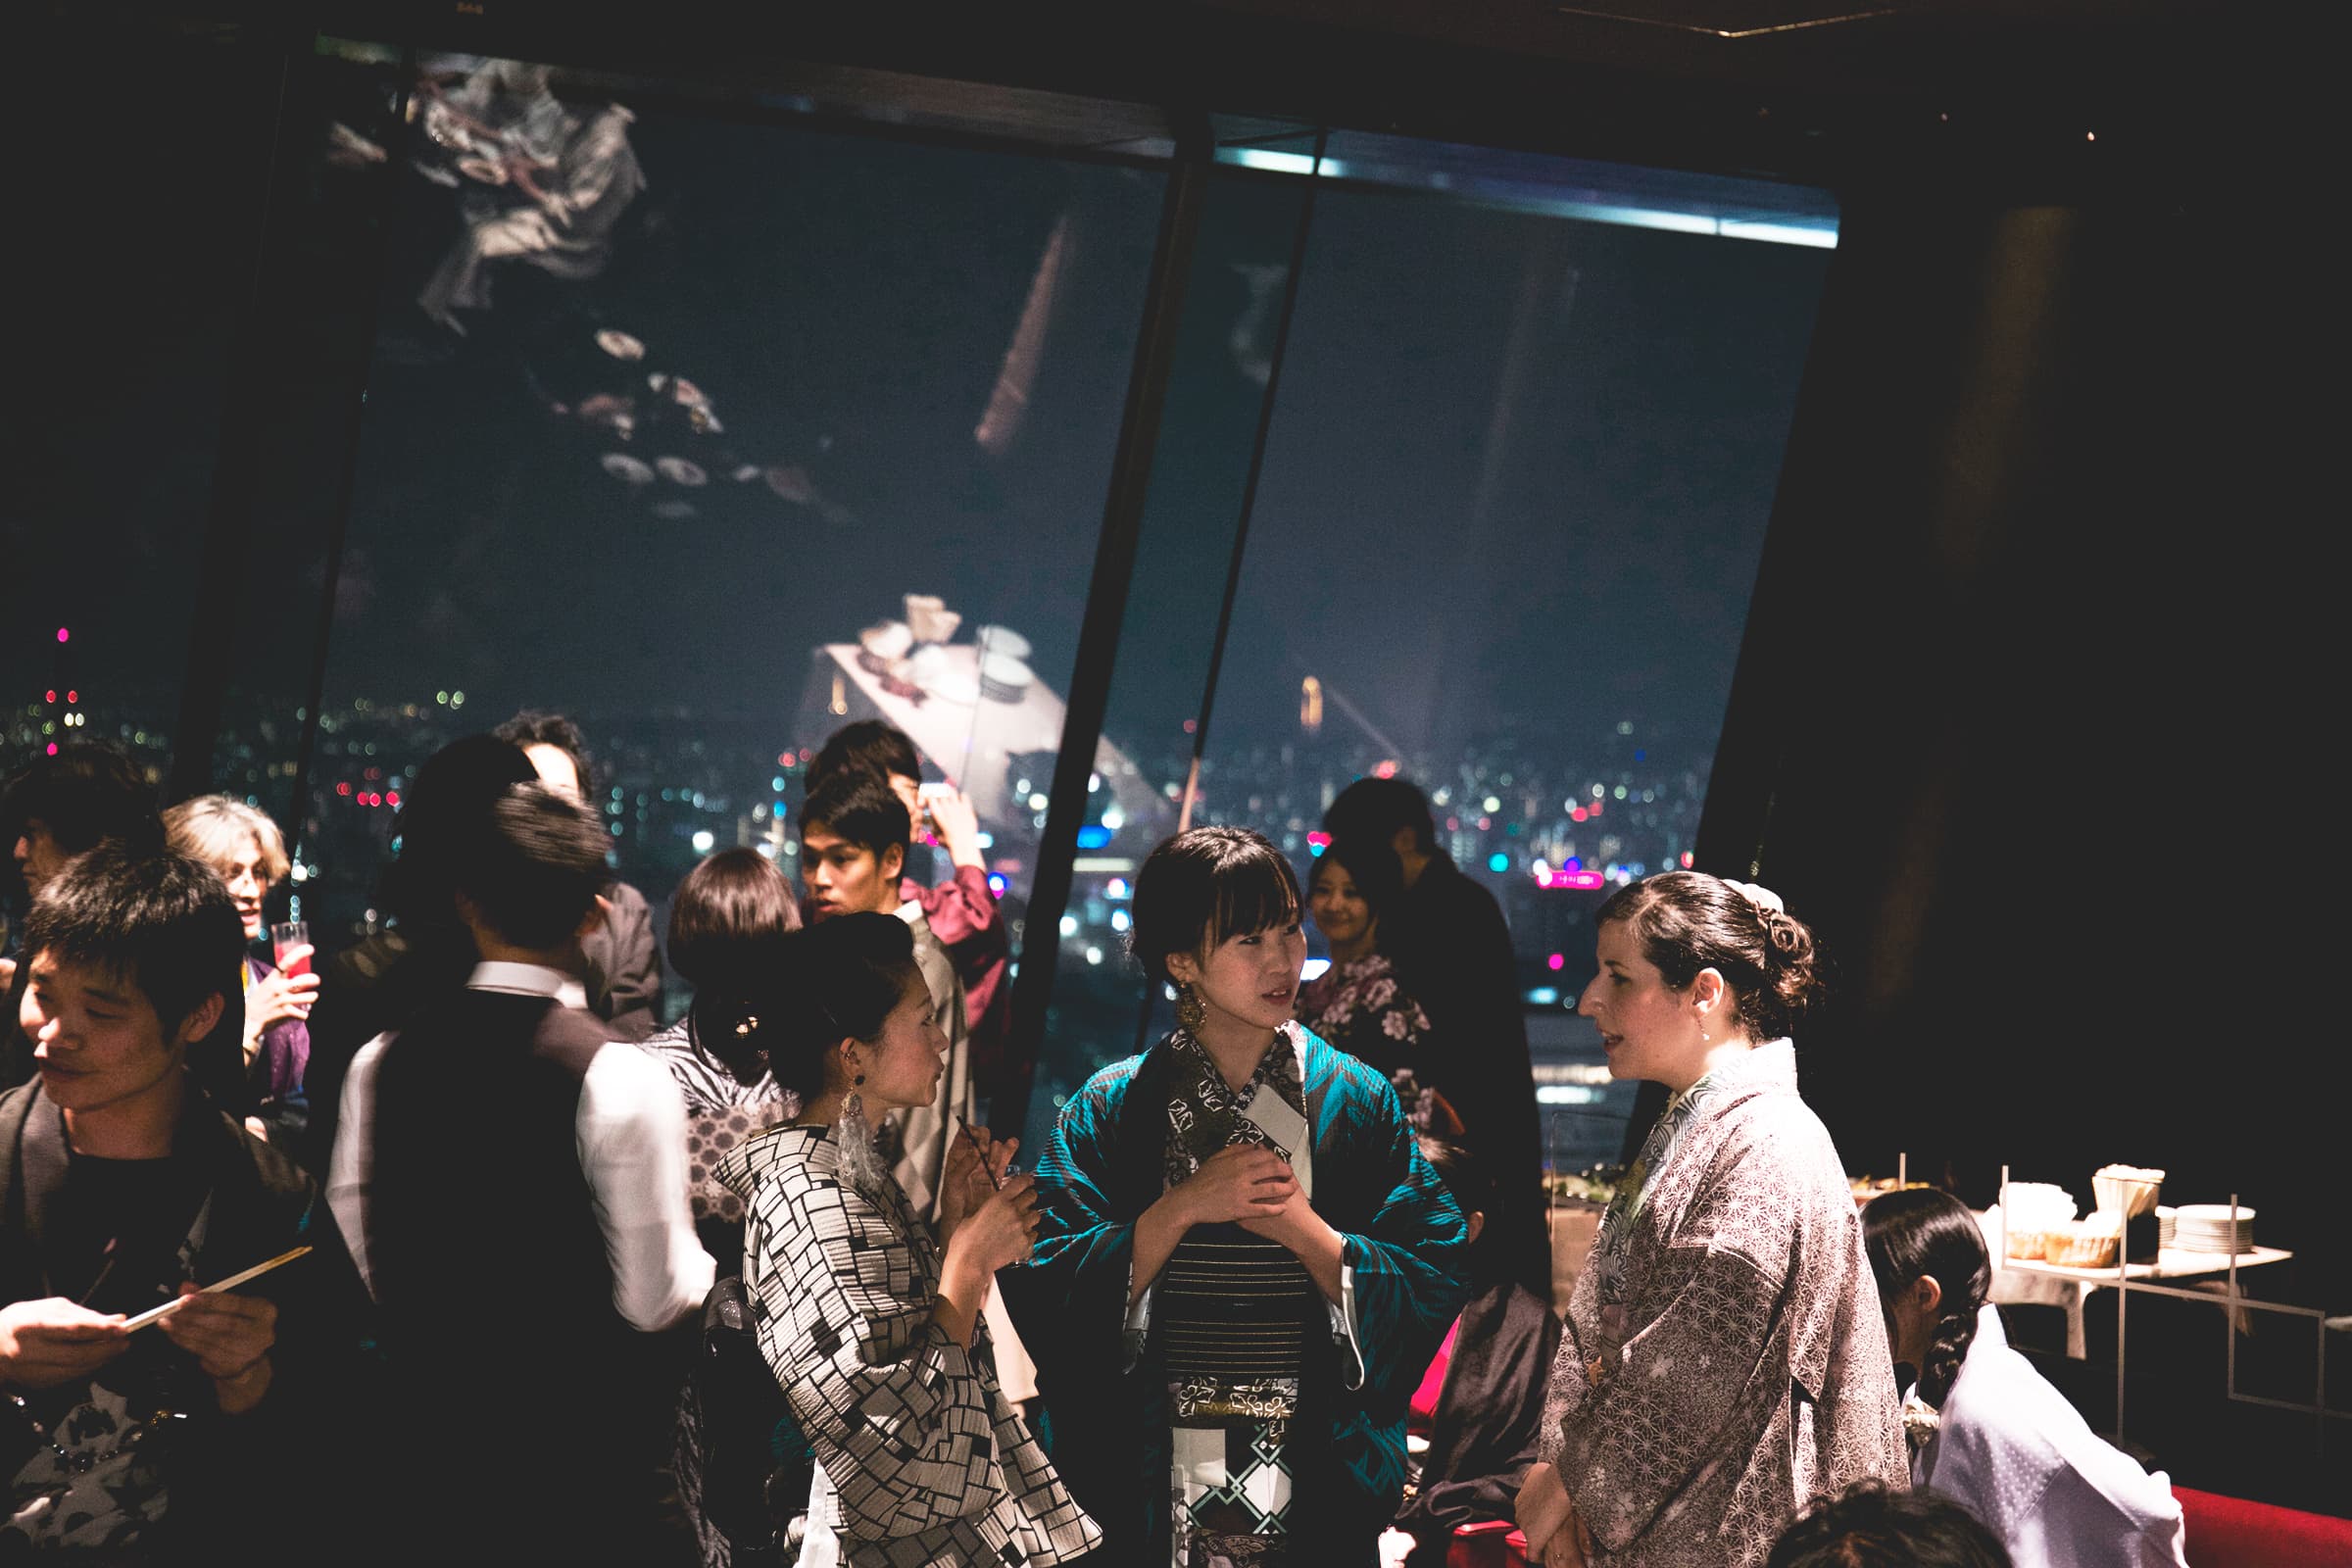 kimono party at lucent tower 2015